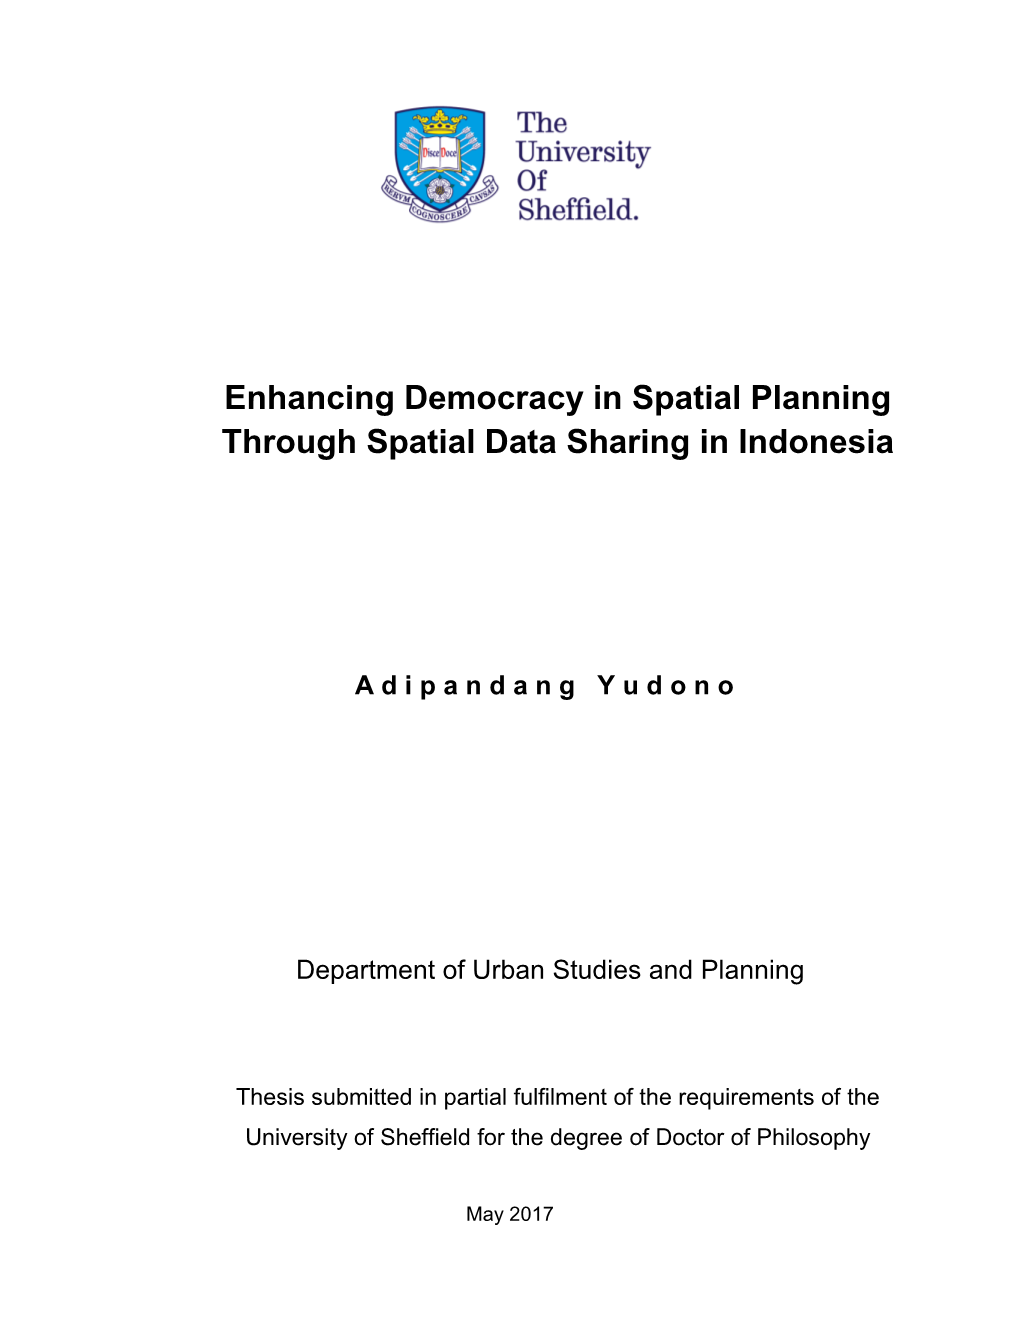 Enhancing Democracy in Spatial Planning Through Spatial Data Sharing in Indonesia